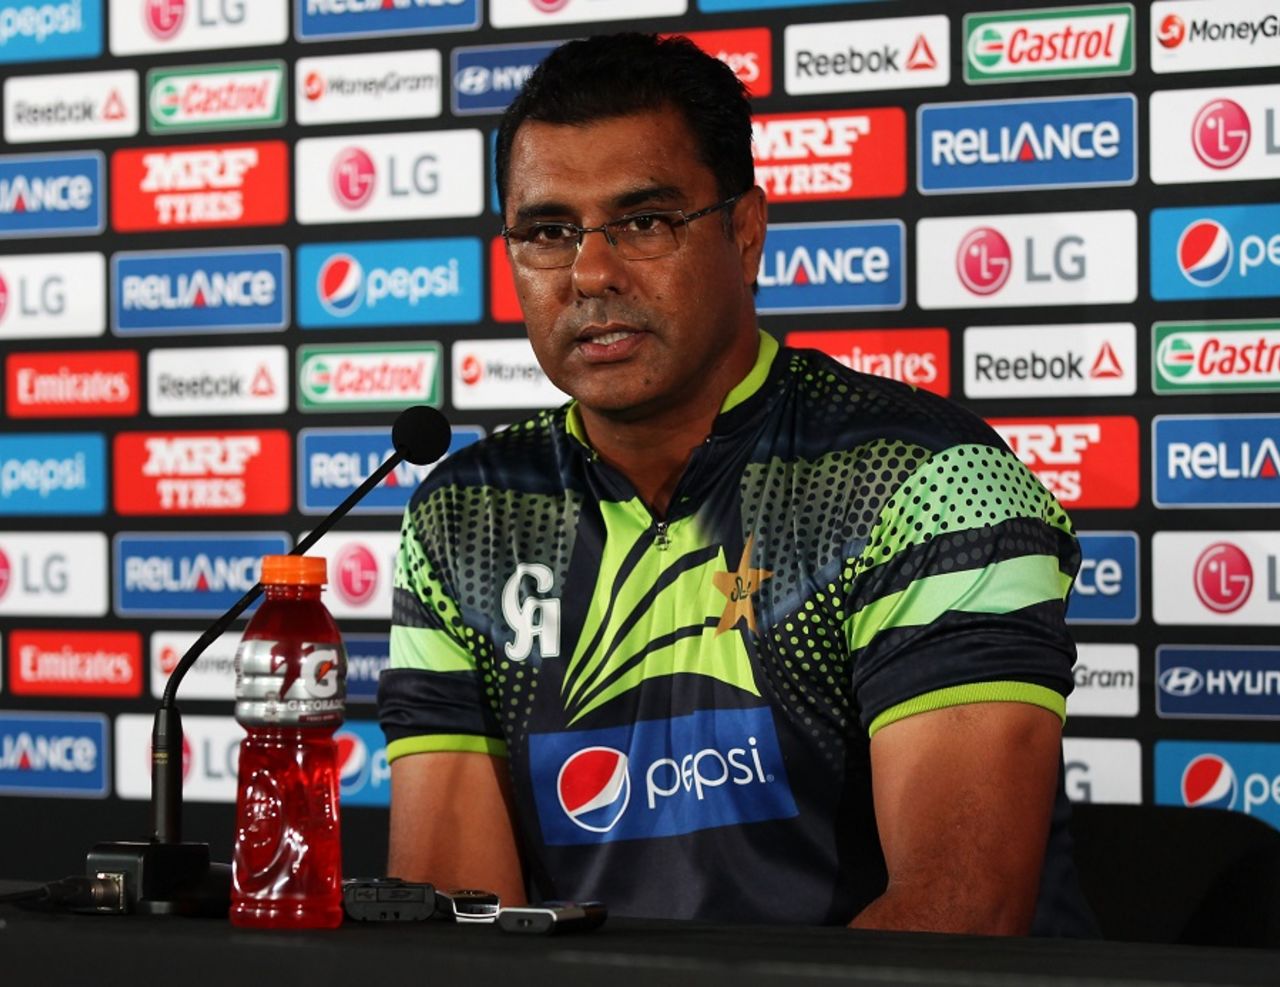 Pakistan coach Waqar Younis speaks to the media after the big win, Pakistan v UAE, World Cup 2015, Group B, Napier, March 4, 2015